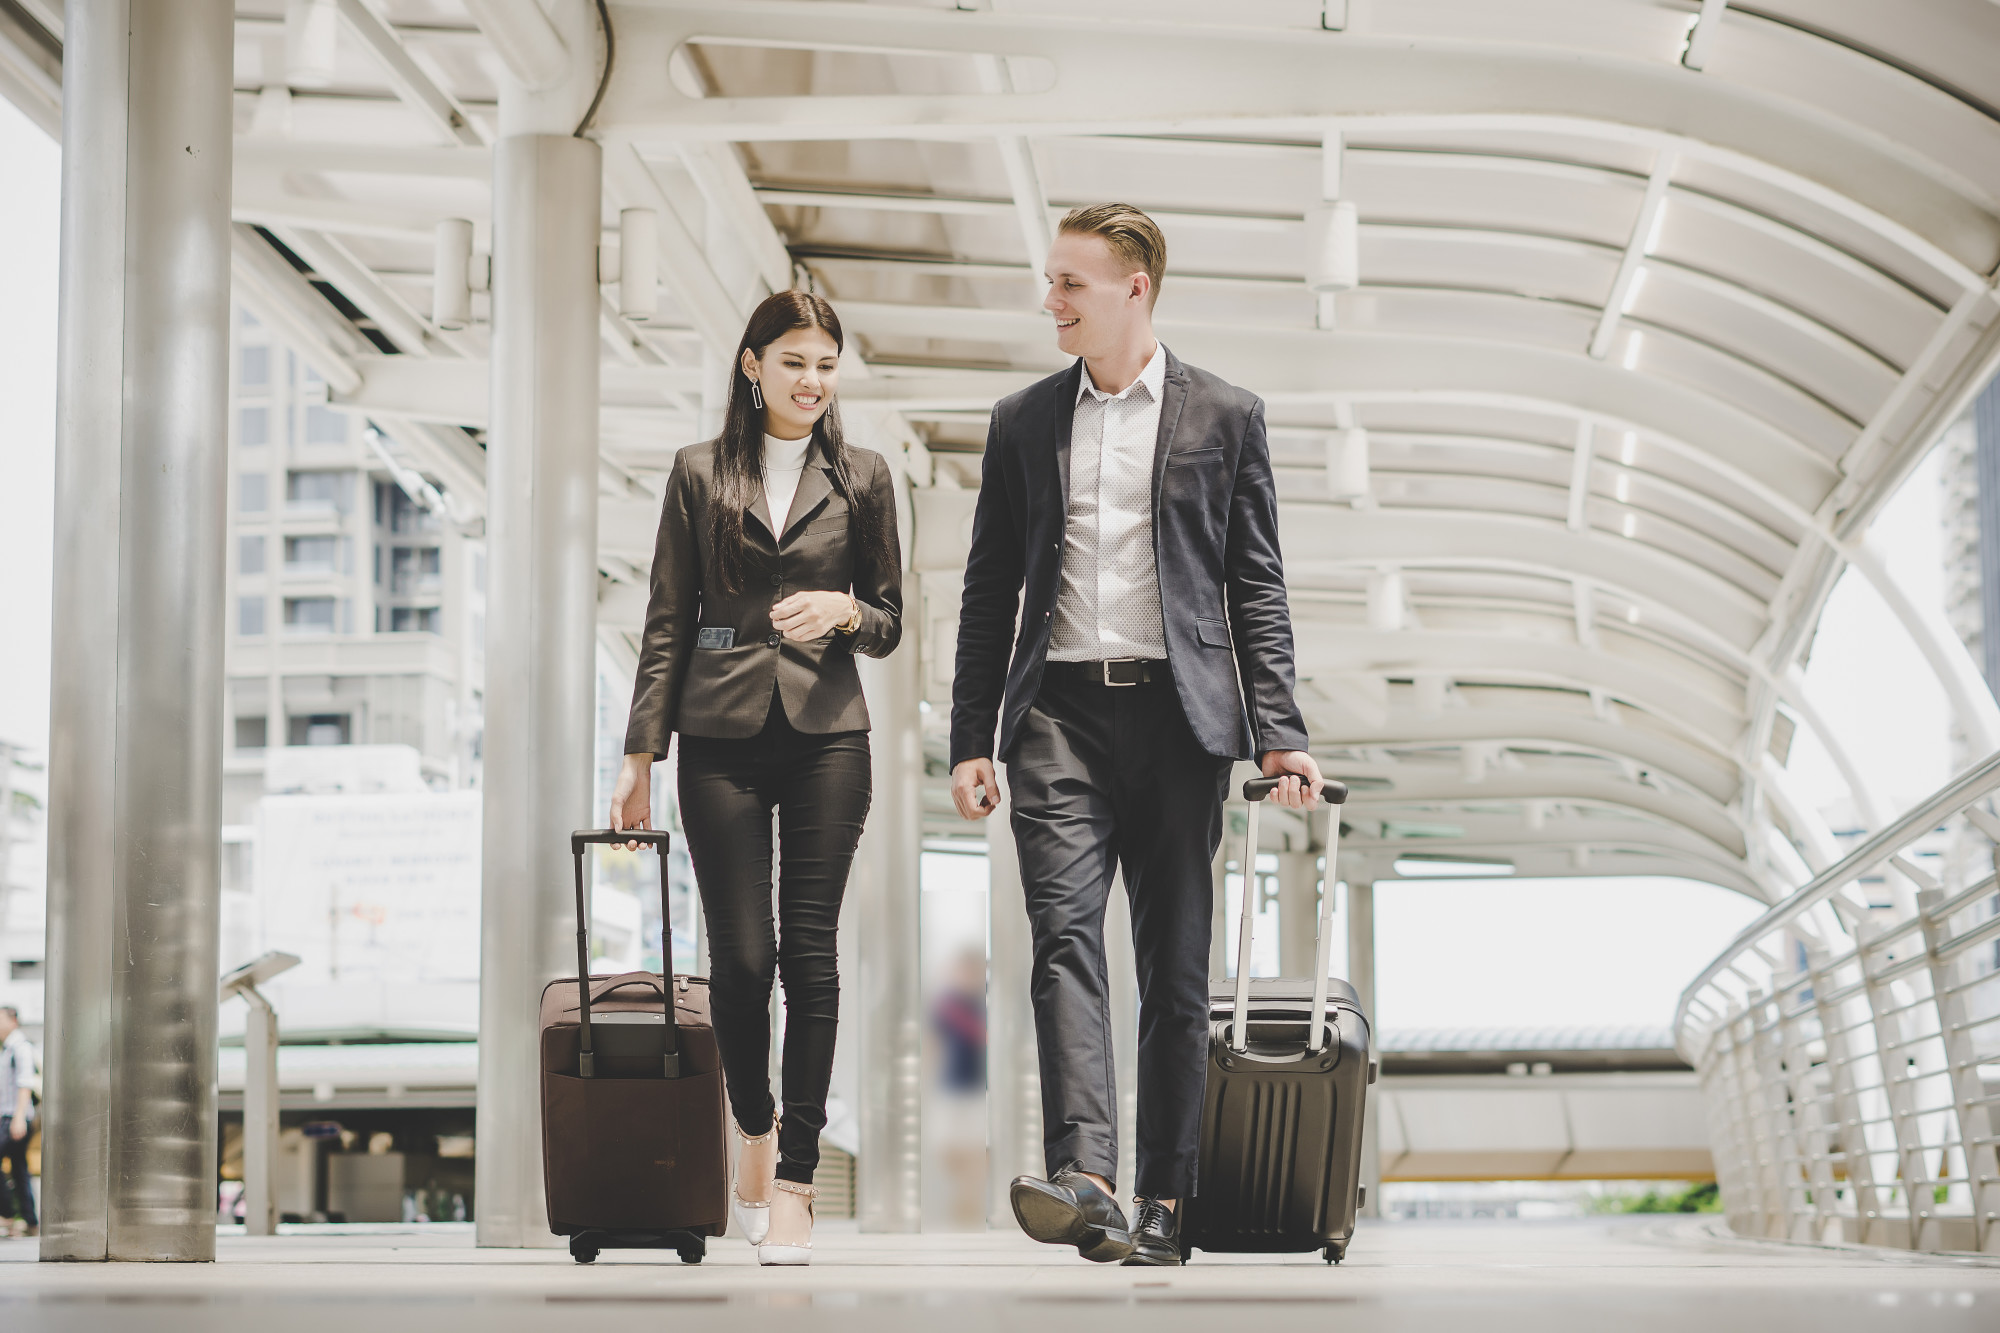 10 Common Business Travel Mistakes and How to Avoid Them - ALLSTAR